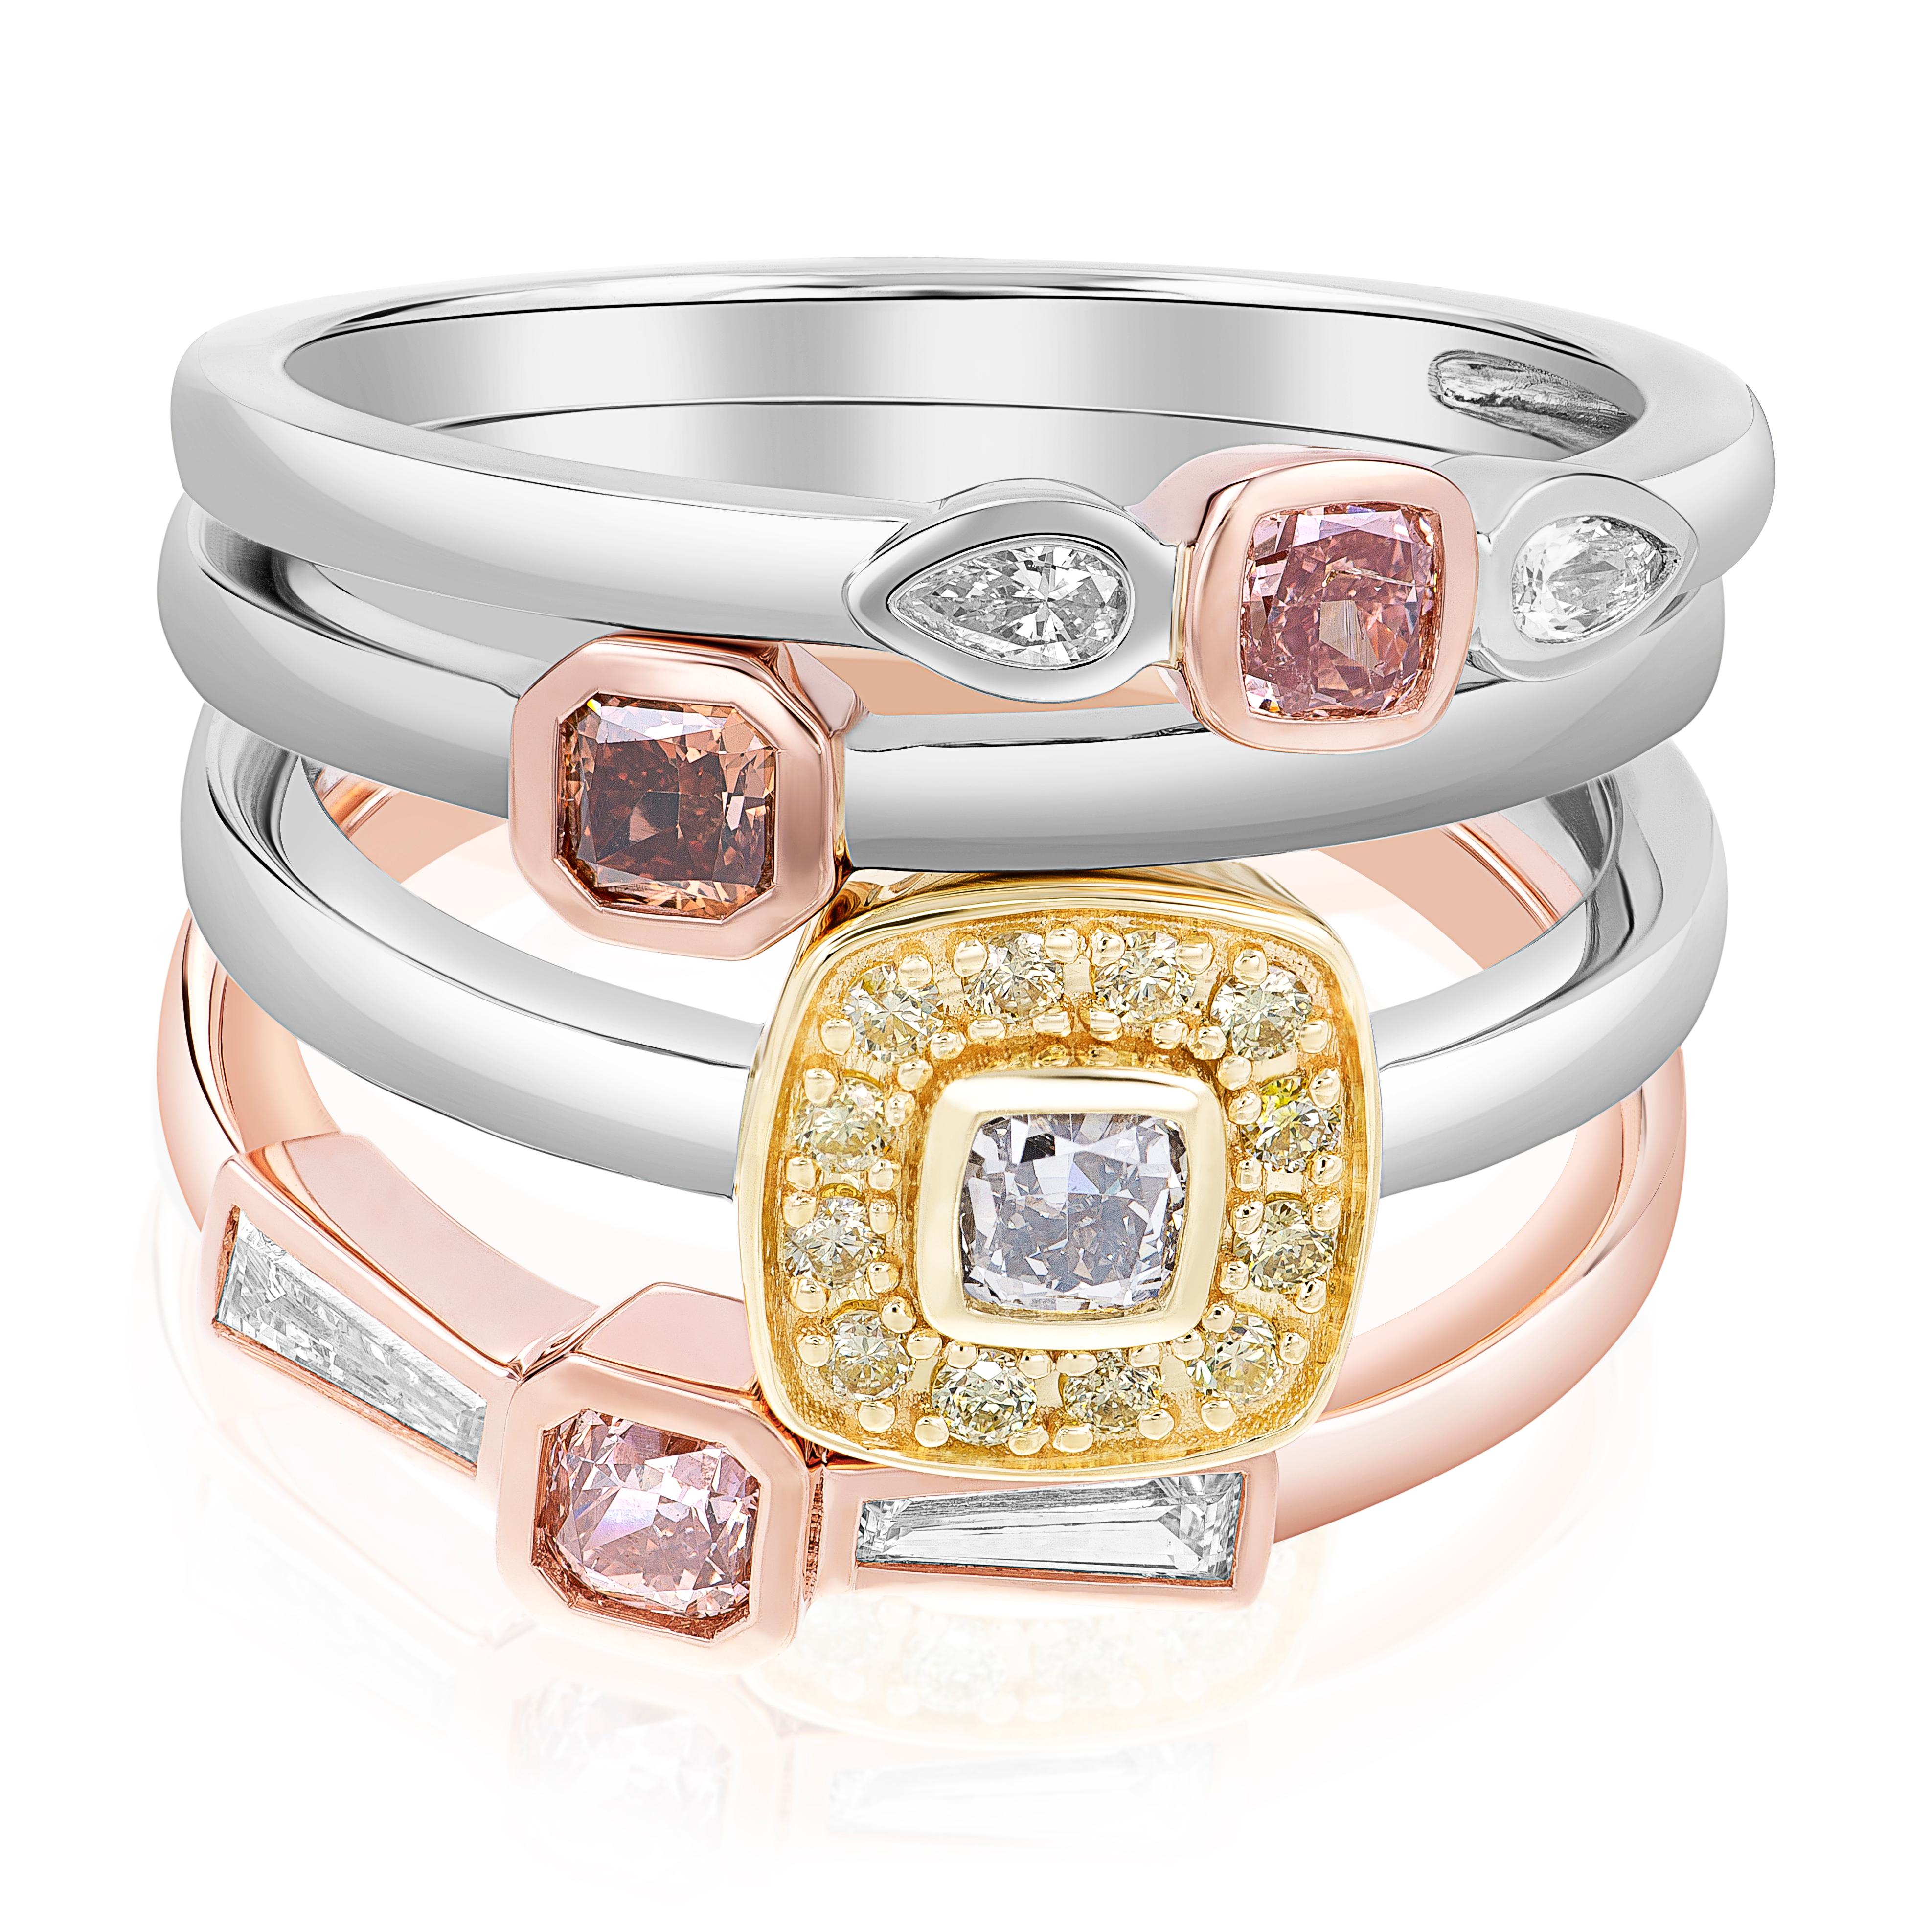 Women's 14k Gold Stackable Ring Featuring a 0.08 Pink Diamond Accented by Baguettes For Sale